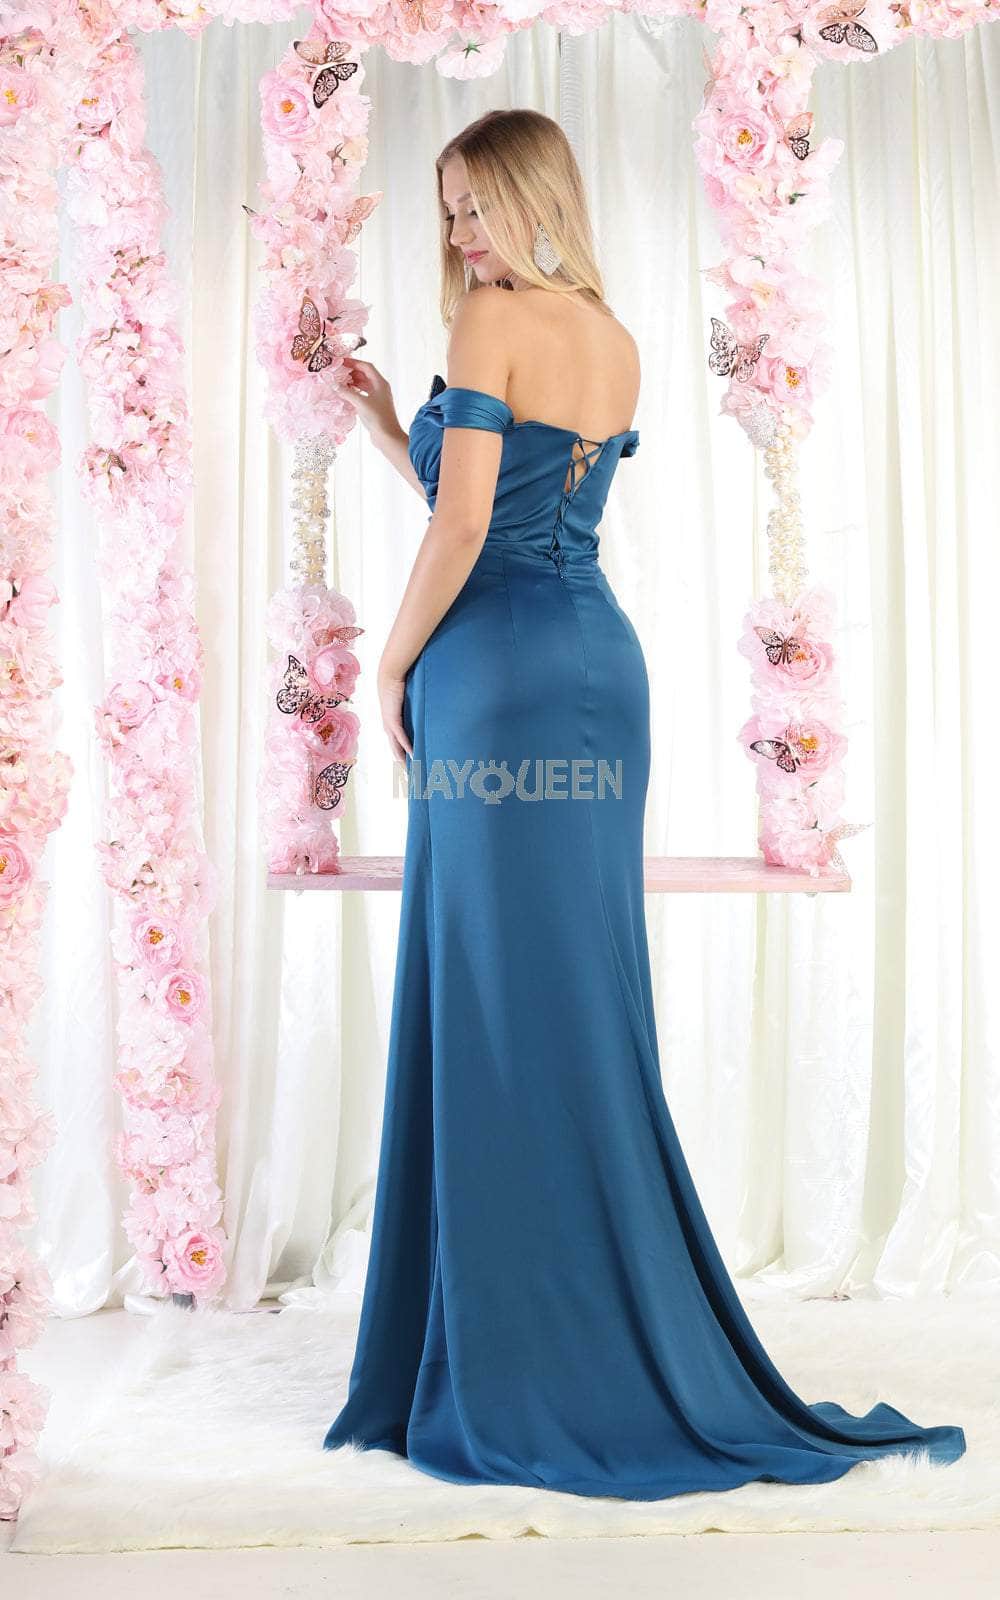 May Queen RQ7971 - Beaded Off-Shoulder Prom Dress Special Occasion Dress